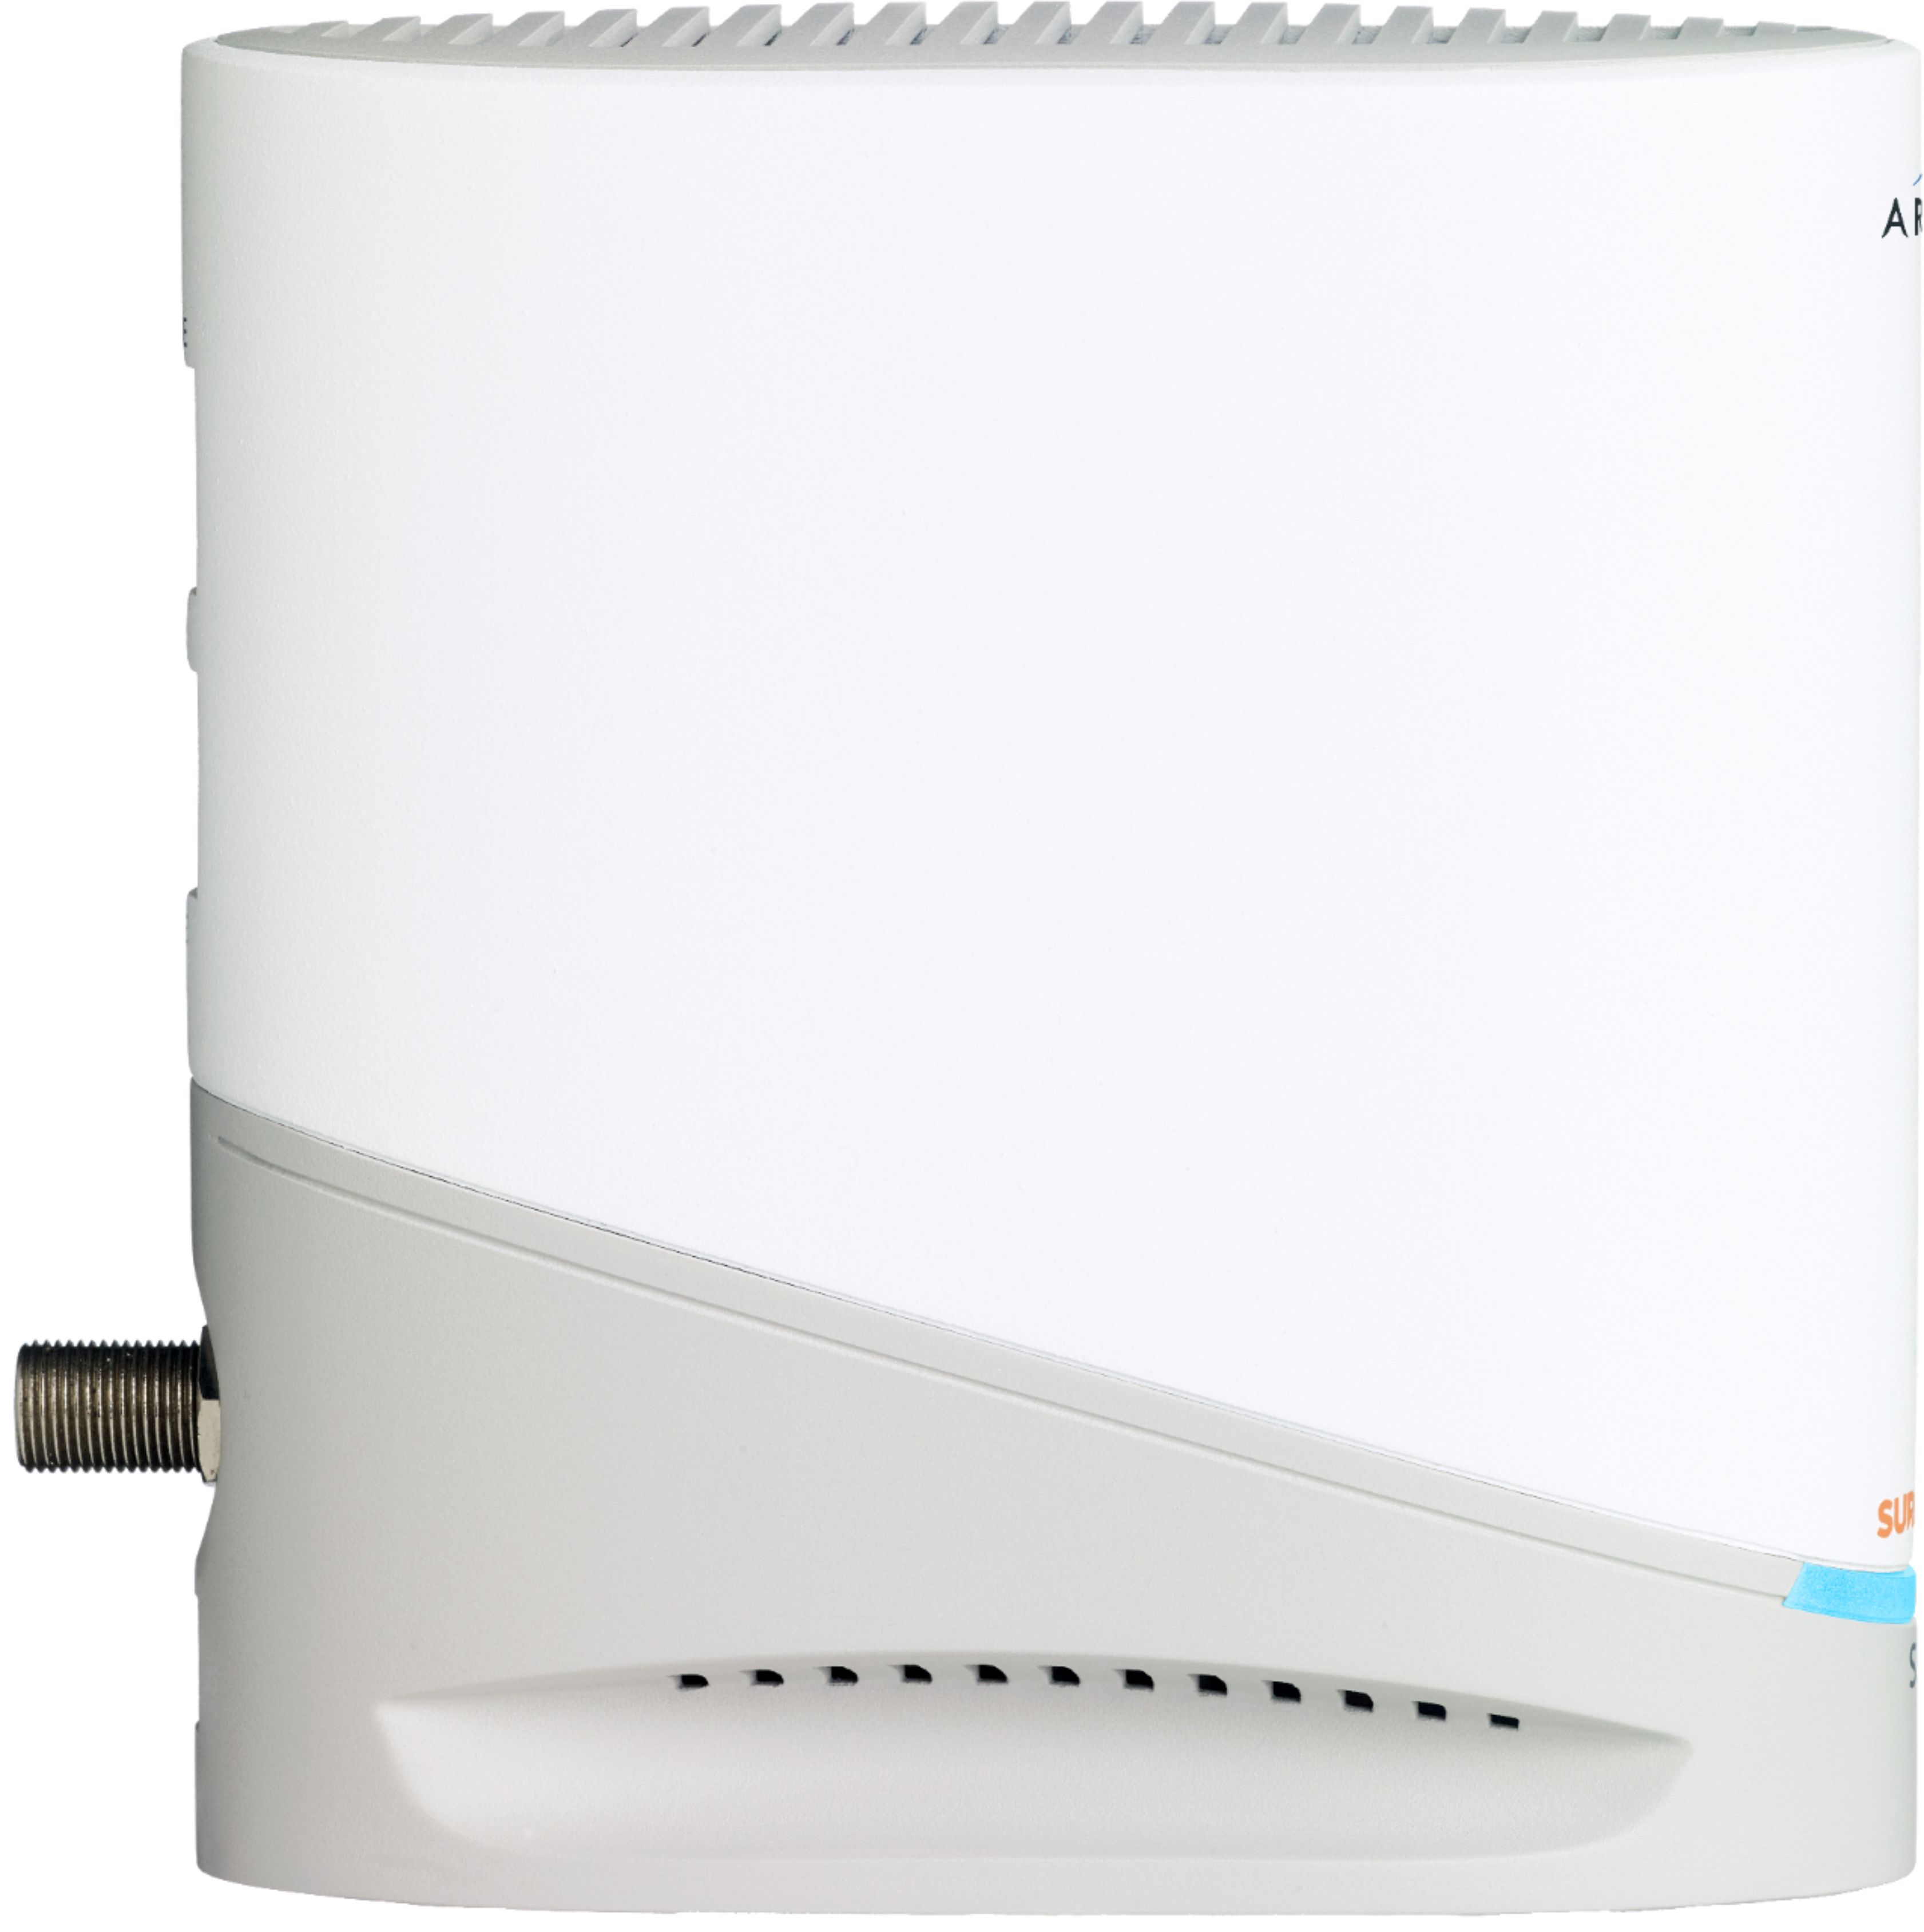 Left View: ARRIS - SURFboard S33 32 x 8 DOCSIS 3.1 Multi-Gig Cable Modem with 2.5 Gbps Ethernet Port - White